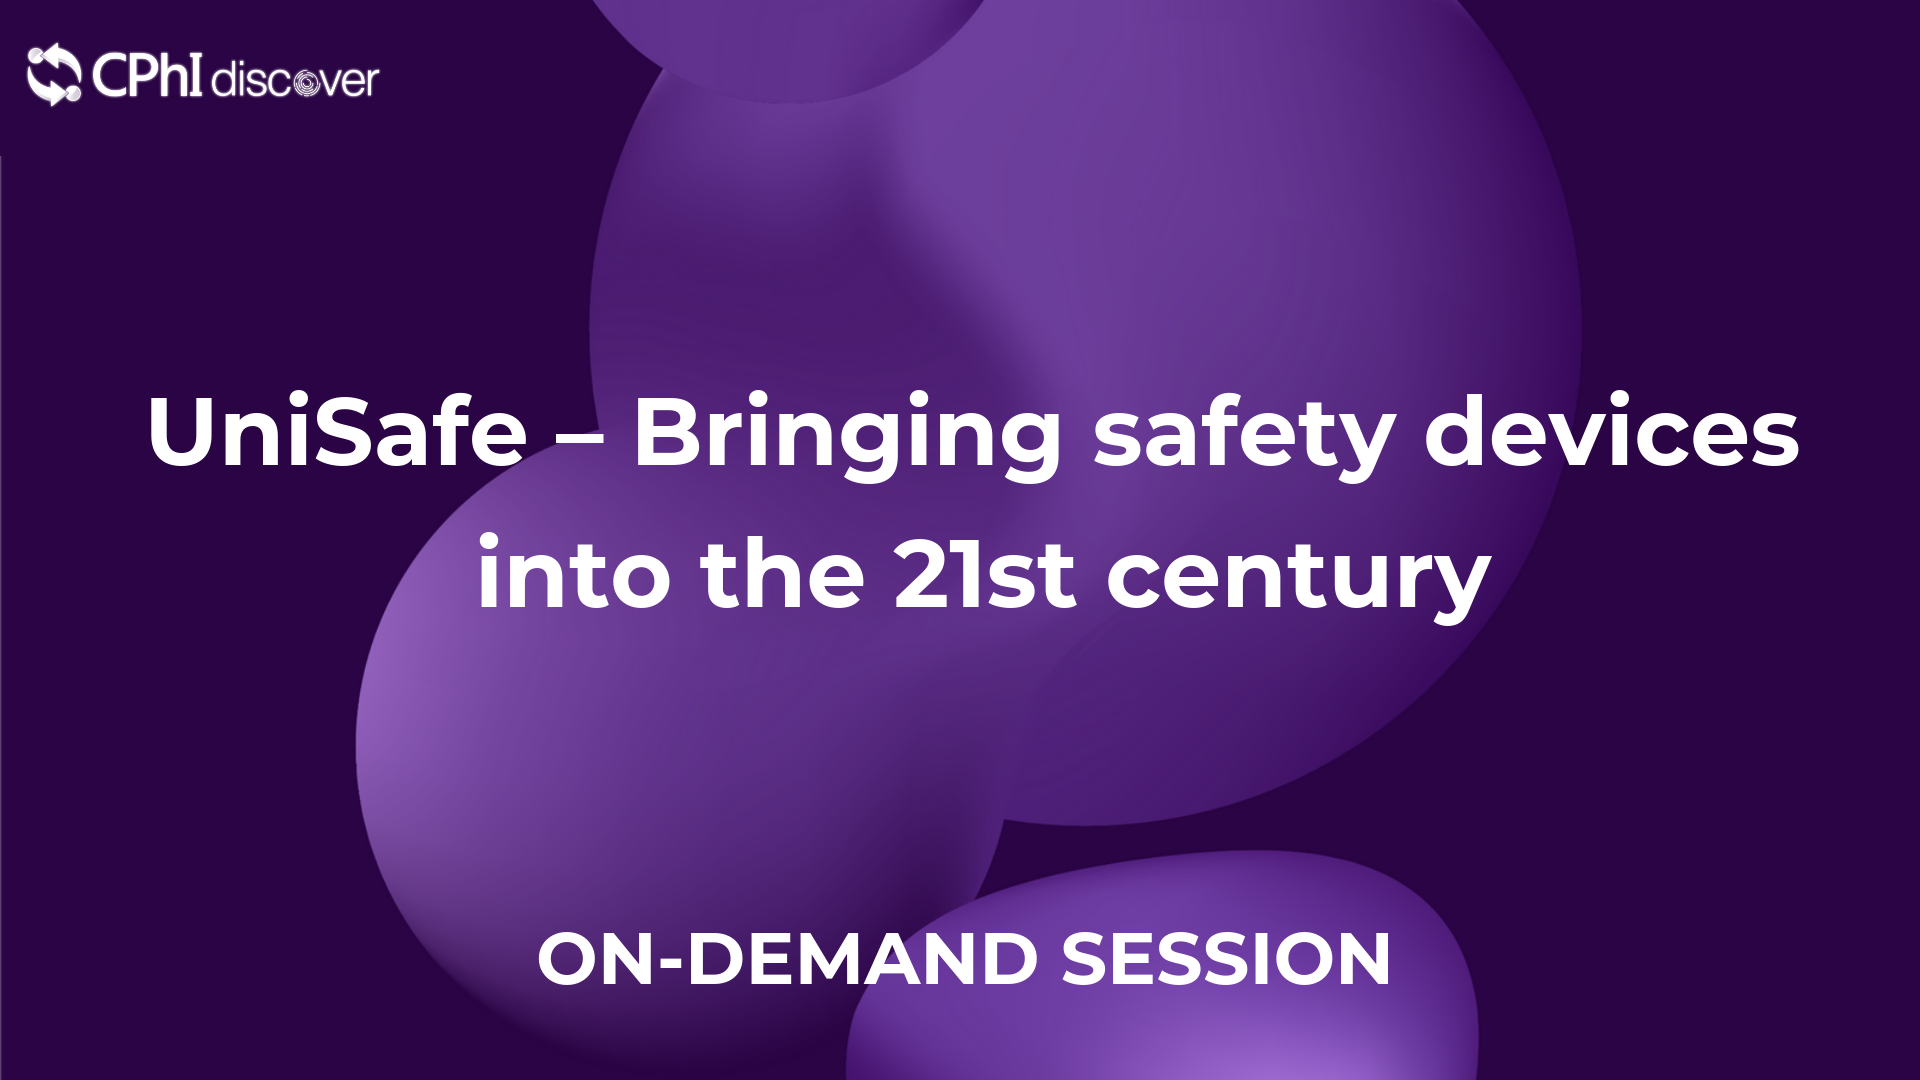 UniSafe – Bringing safety devices into the 21st century